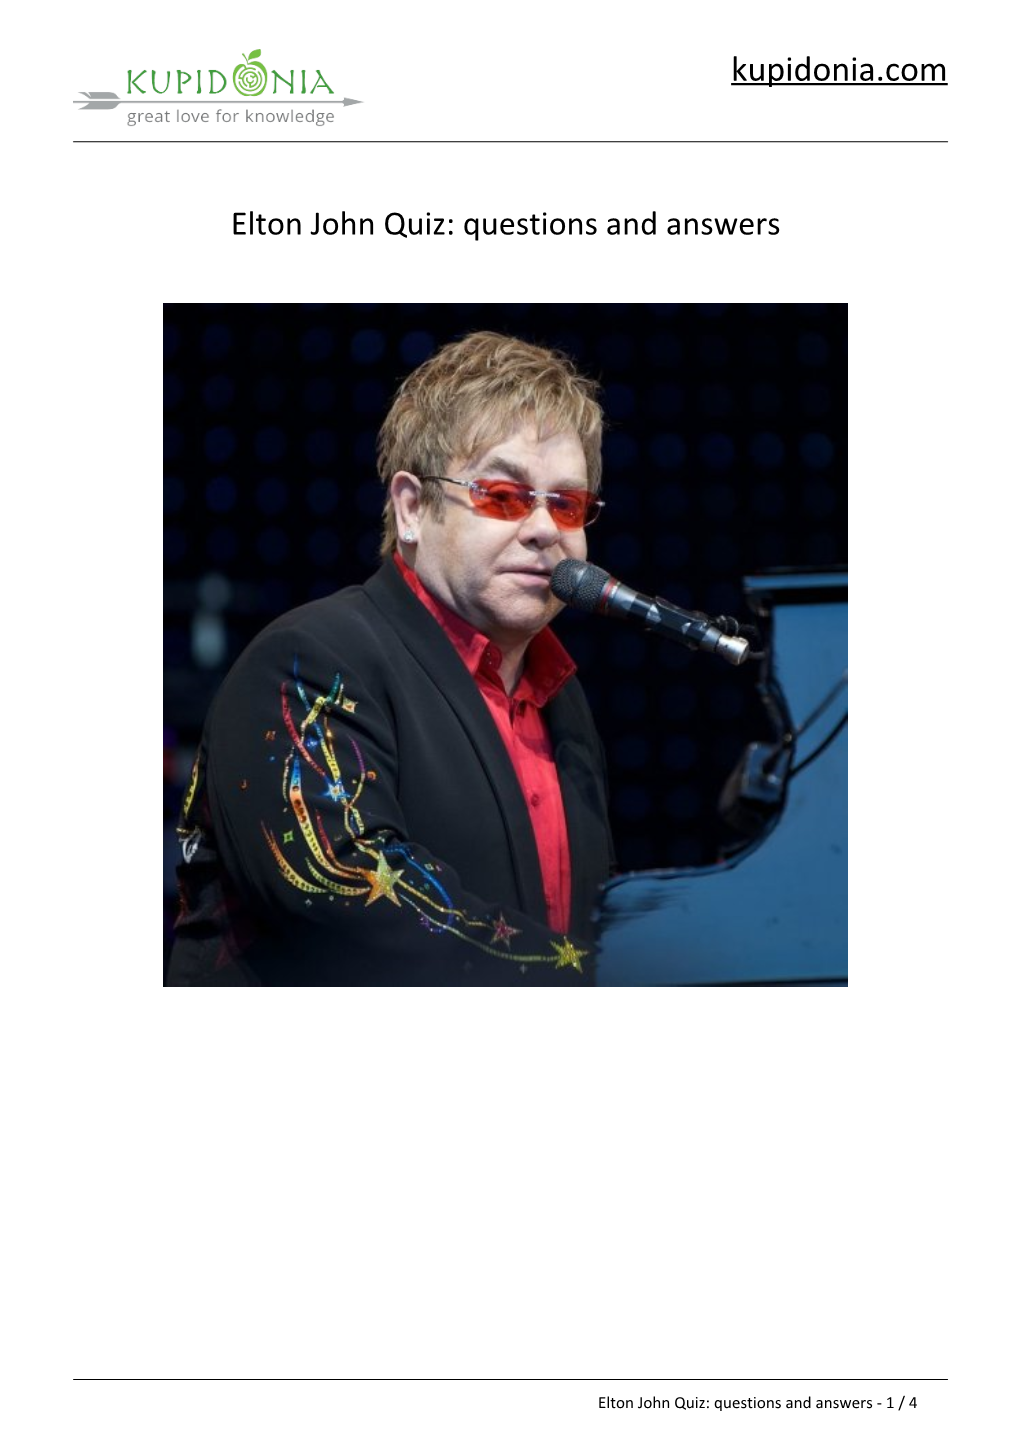 Elton John Quiz: Questions and Answers